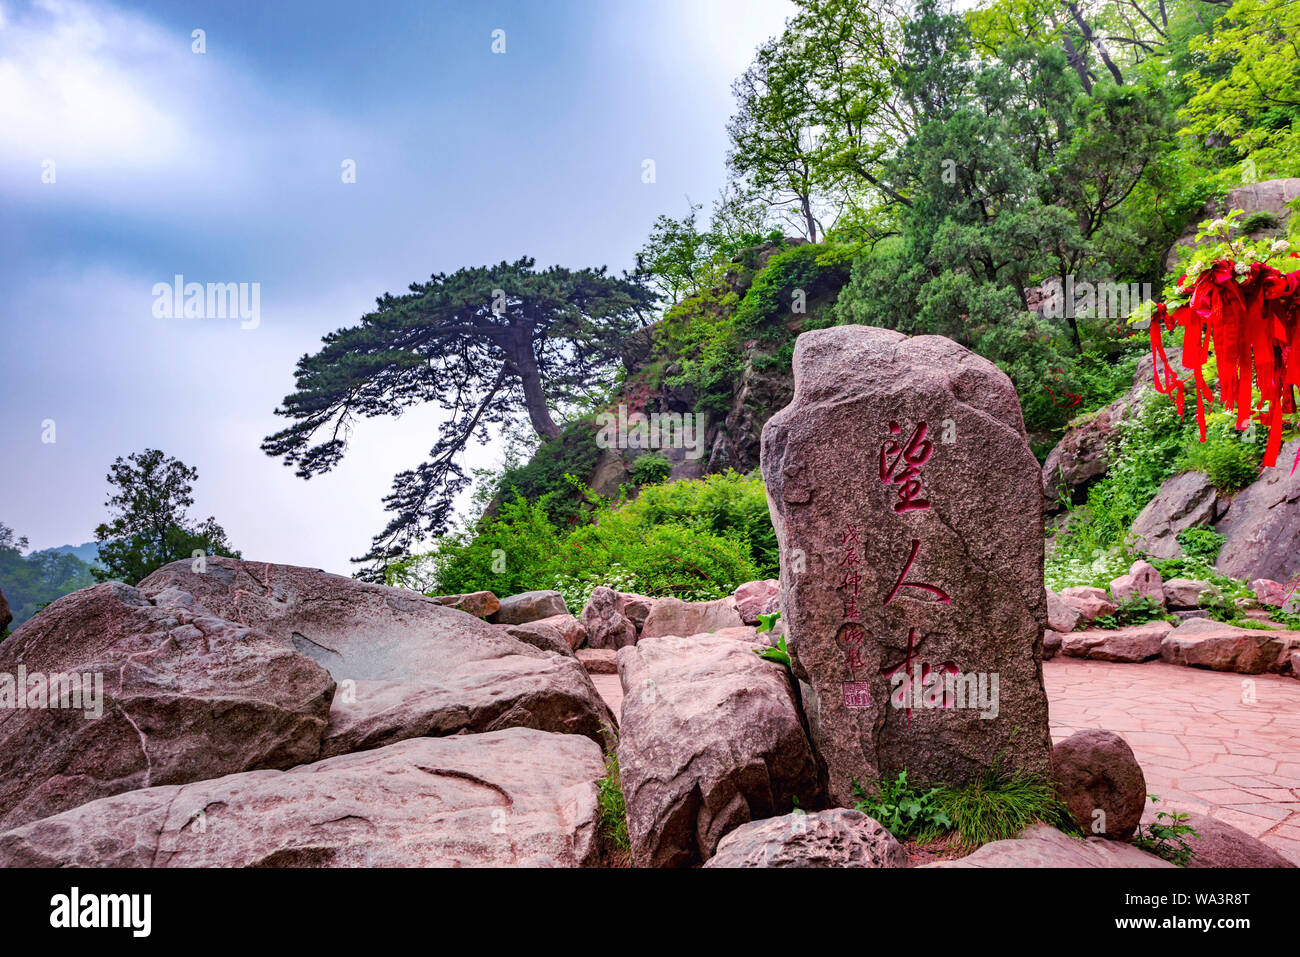 Mount tai in shandong province Stock Photo